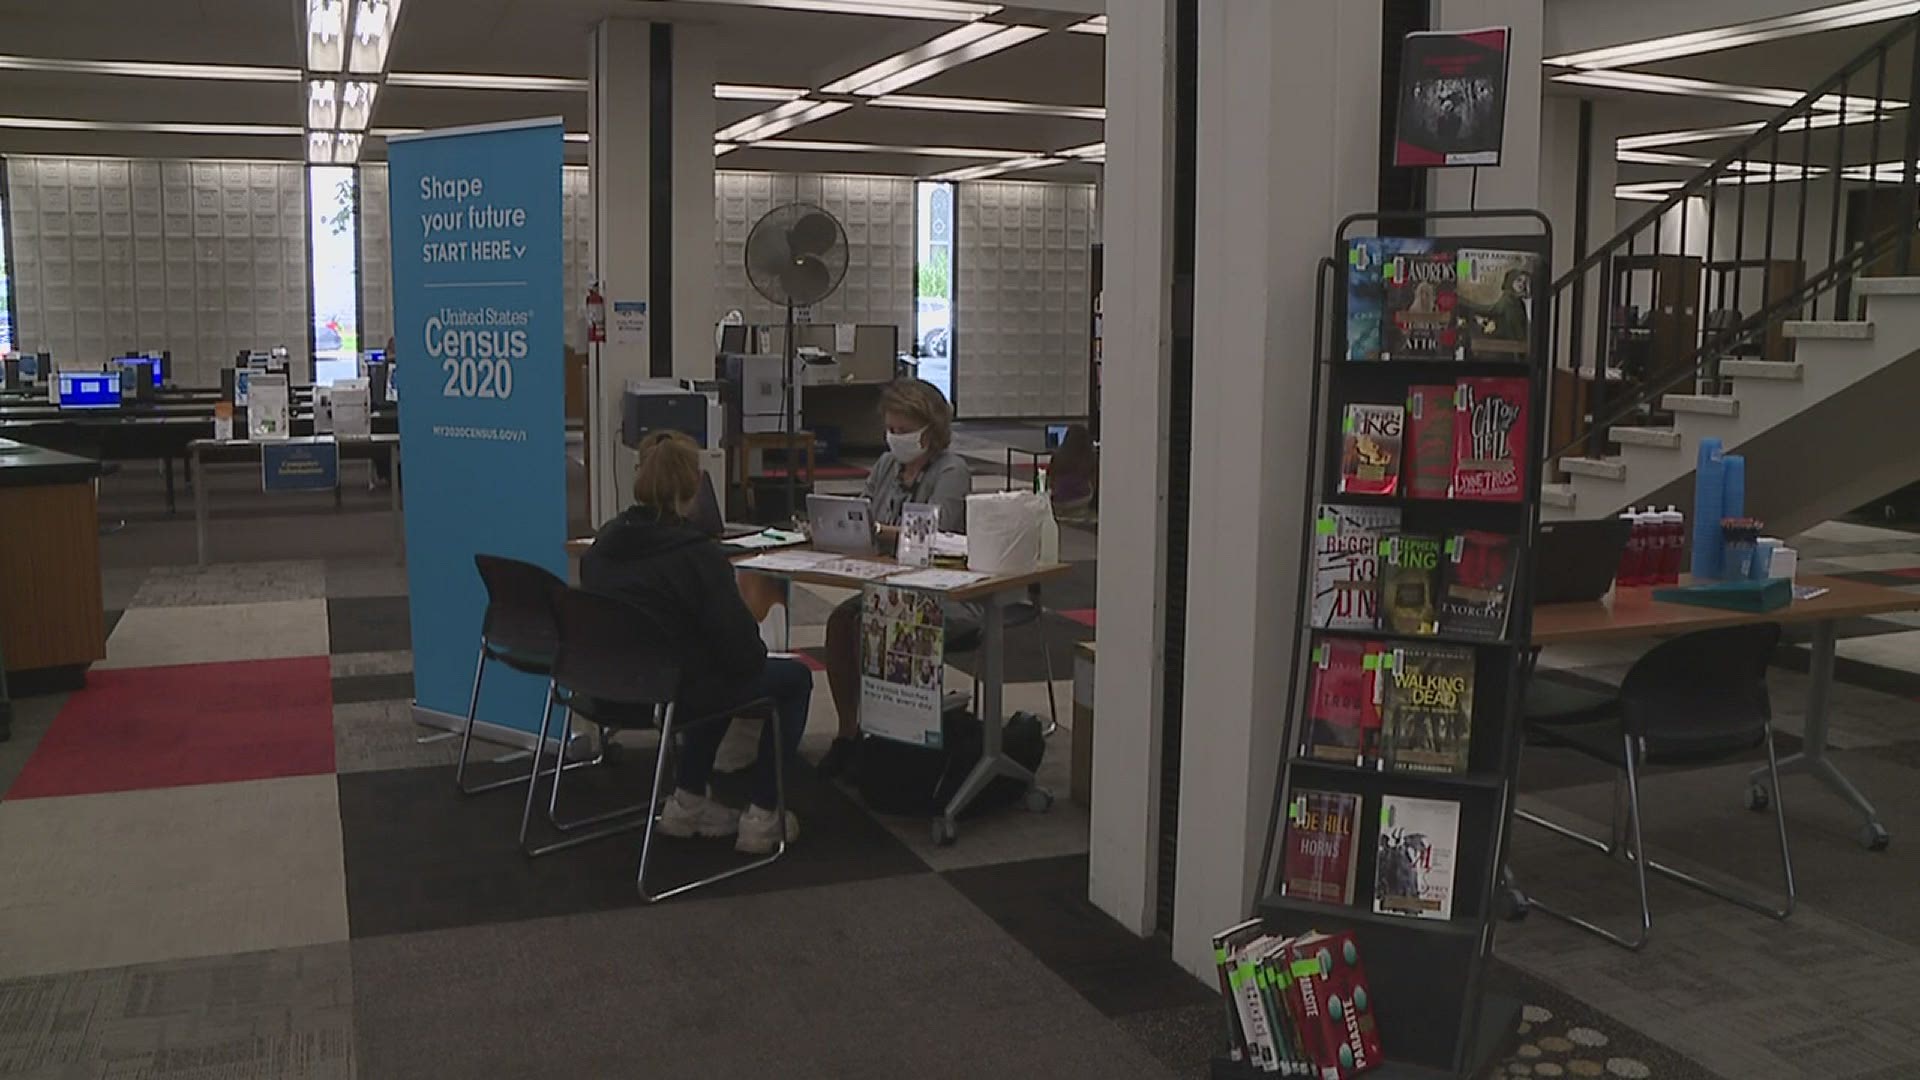 Davenport city leaders held a census event at the Davenport Public Library on Main Street Wednesday to help the under-counted downtown area complete their census.